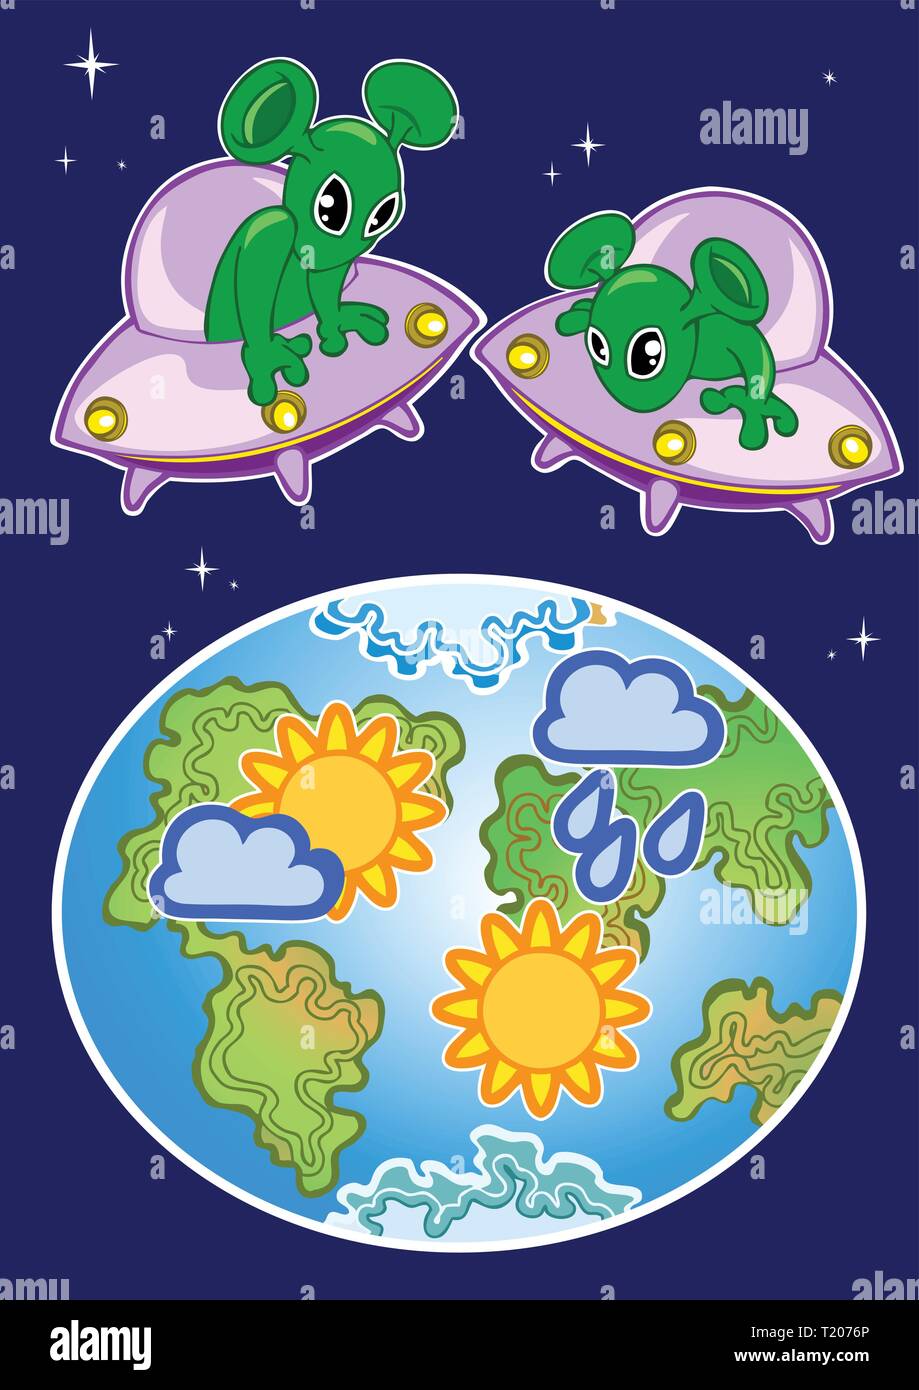 The vector illustration shows two funny aliens in a spaceship that are viewing the planet Earth. Stock Vector